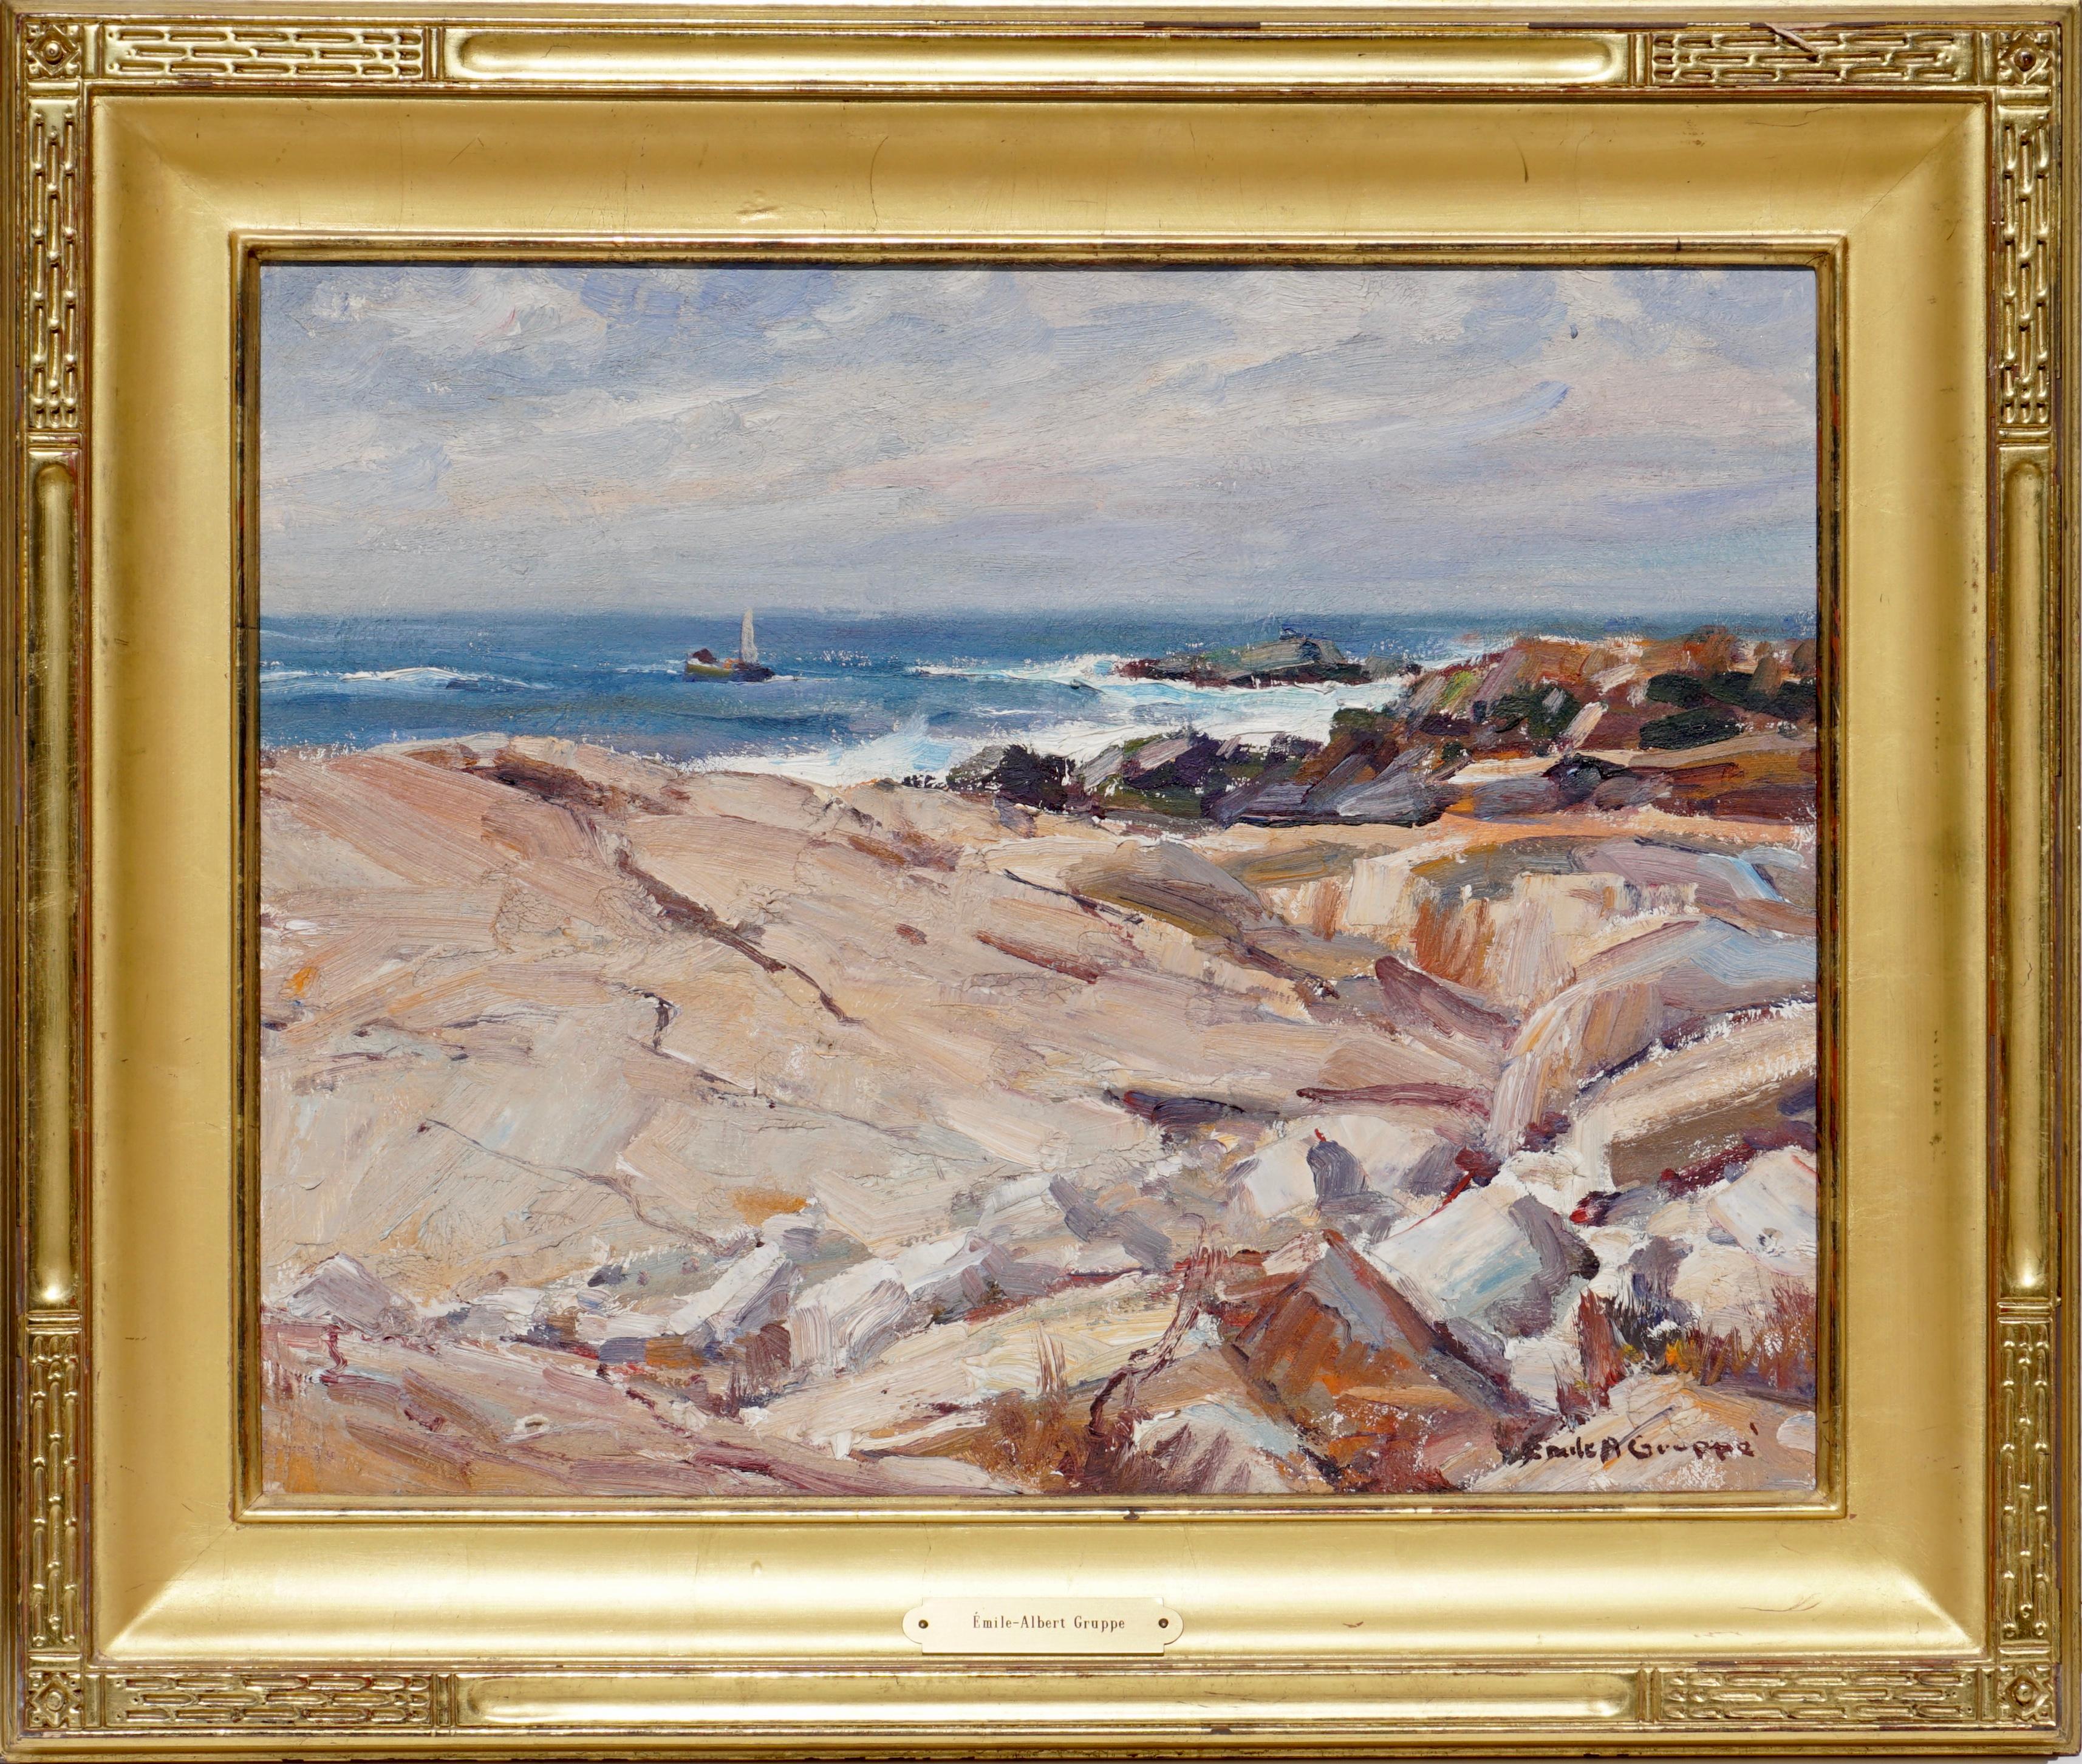 Emile Gruppe (American, 1896-1978) Bass Rocks, Gloucester coastal rocky formations with a sea view with a sailboat in the distance.

Oil on artist board. In an appropriate giltwood frame. Signed (lower right).

Canvas: 16 x 20 inches
Framed: